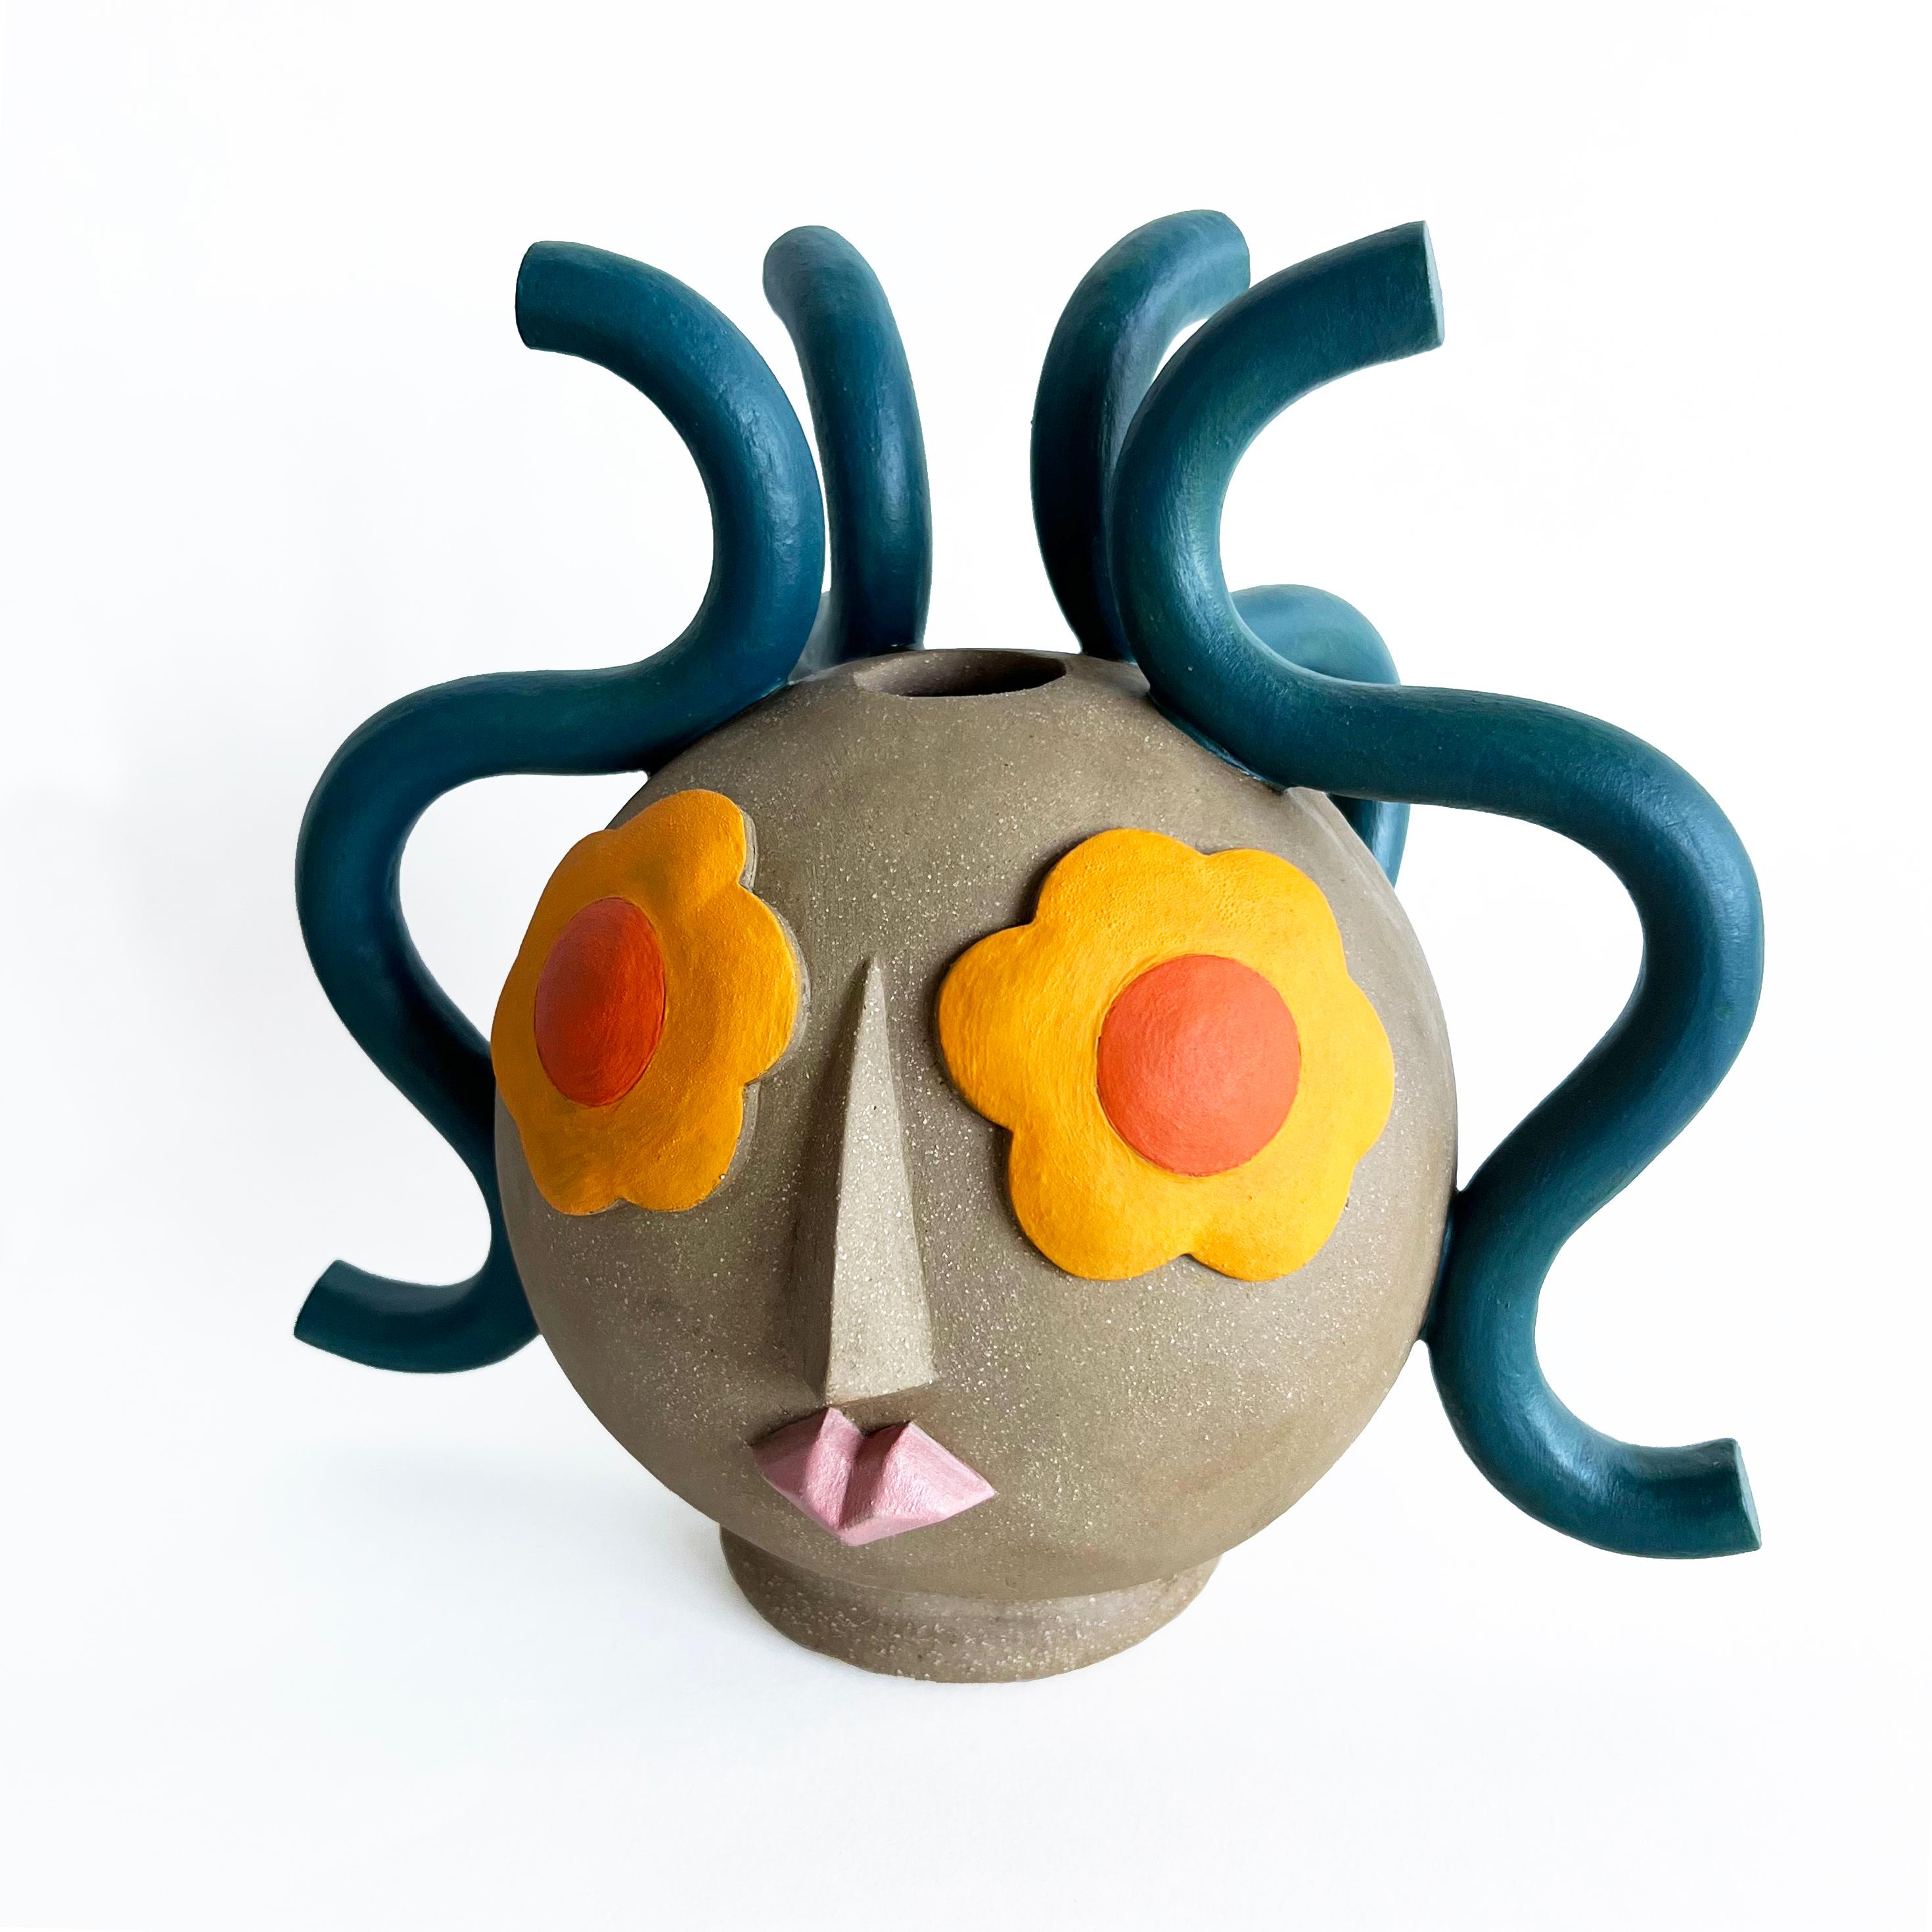 This contemporary figurative vase is handmade by Nashville-based artist, Keavy Murphree. It's hand sculpted in warm brown stoneware with colorful facial features hand-painted with underglaze accents. Rich peacock blue coils of clay create lively